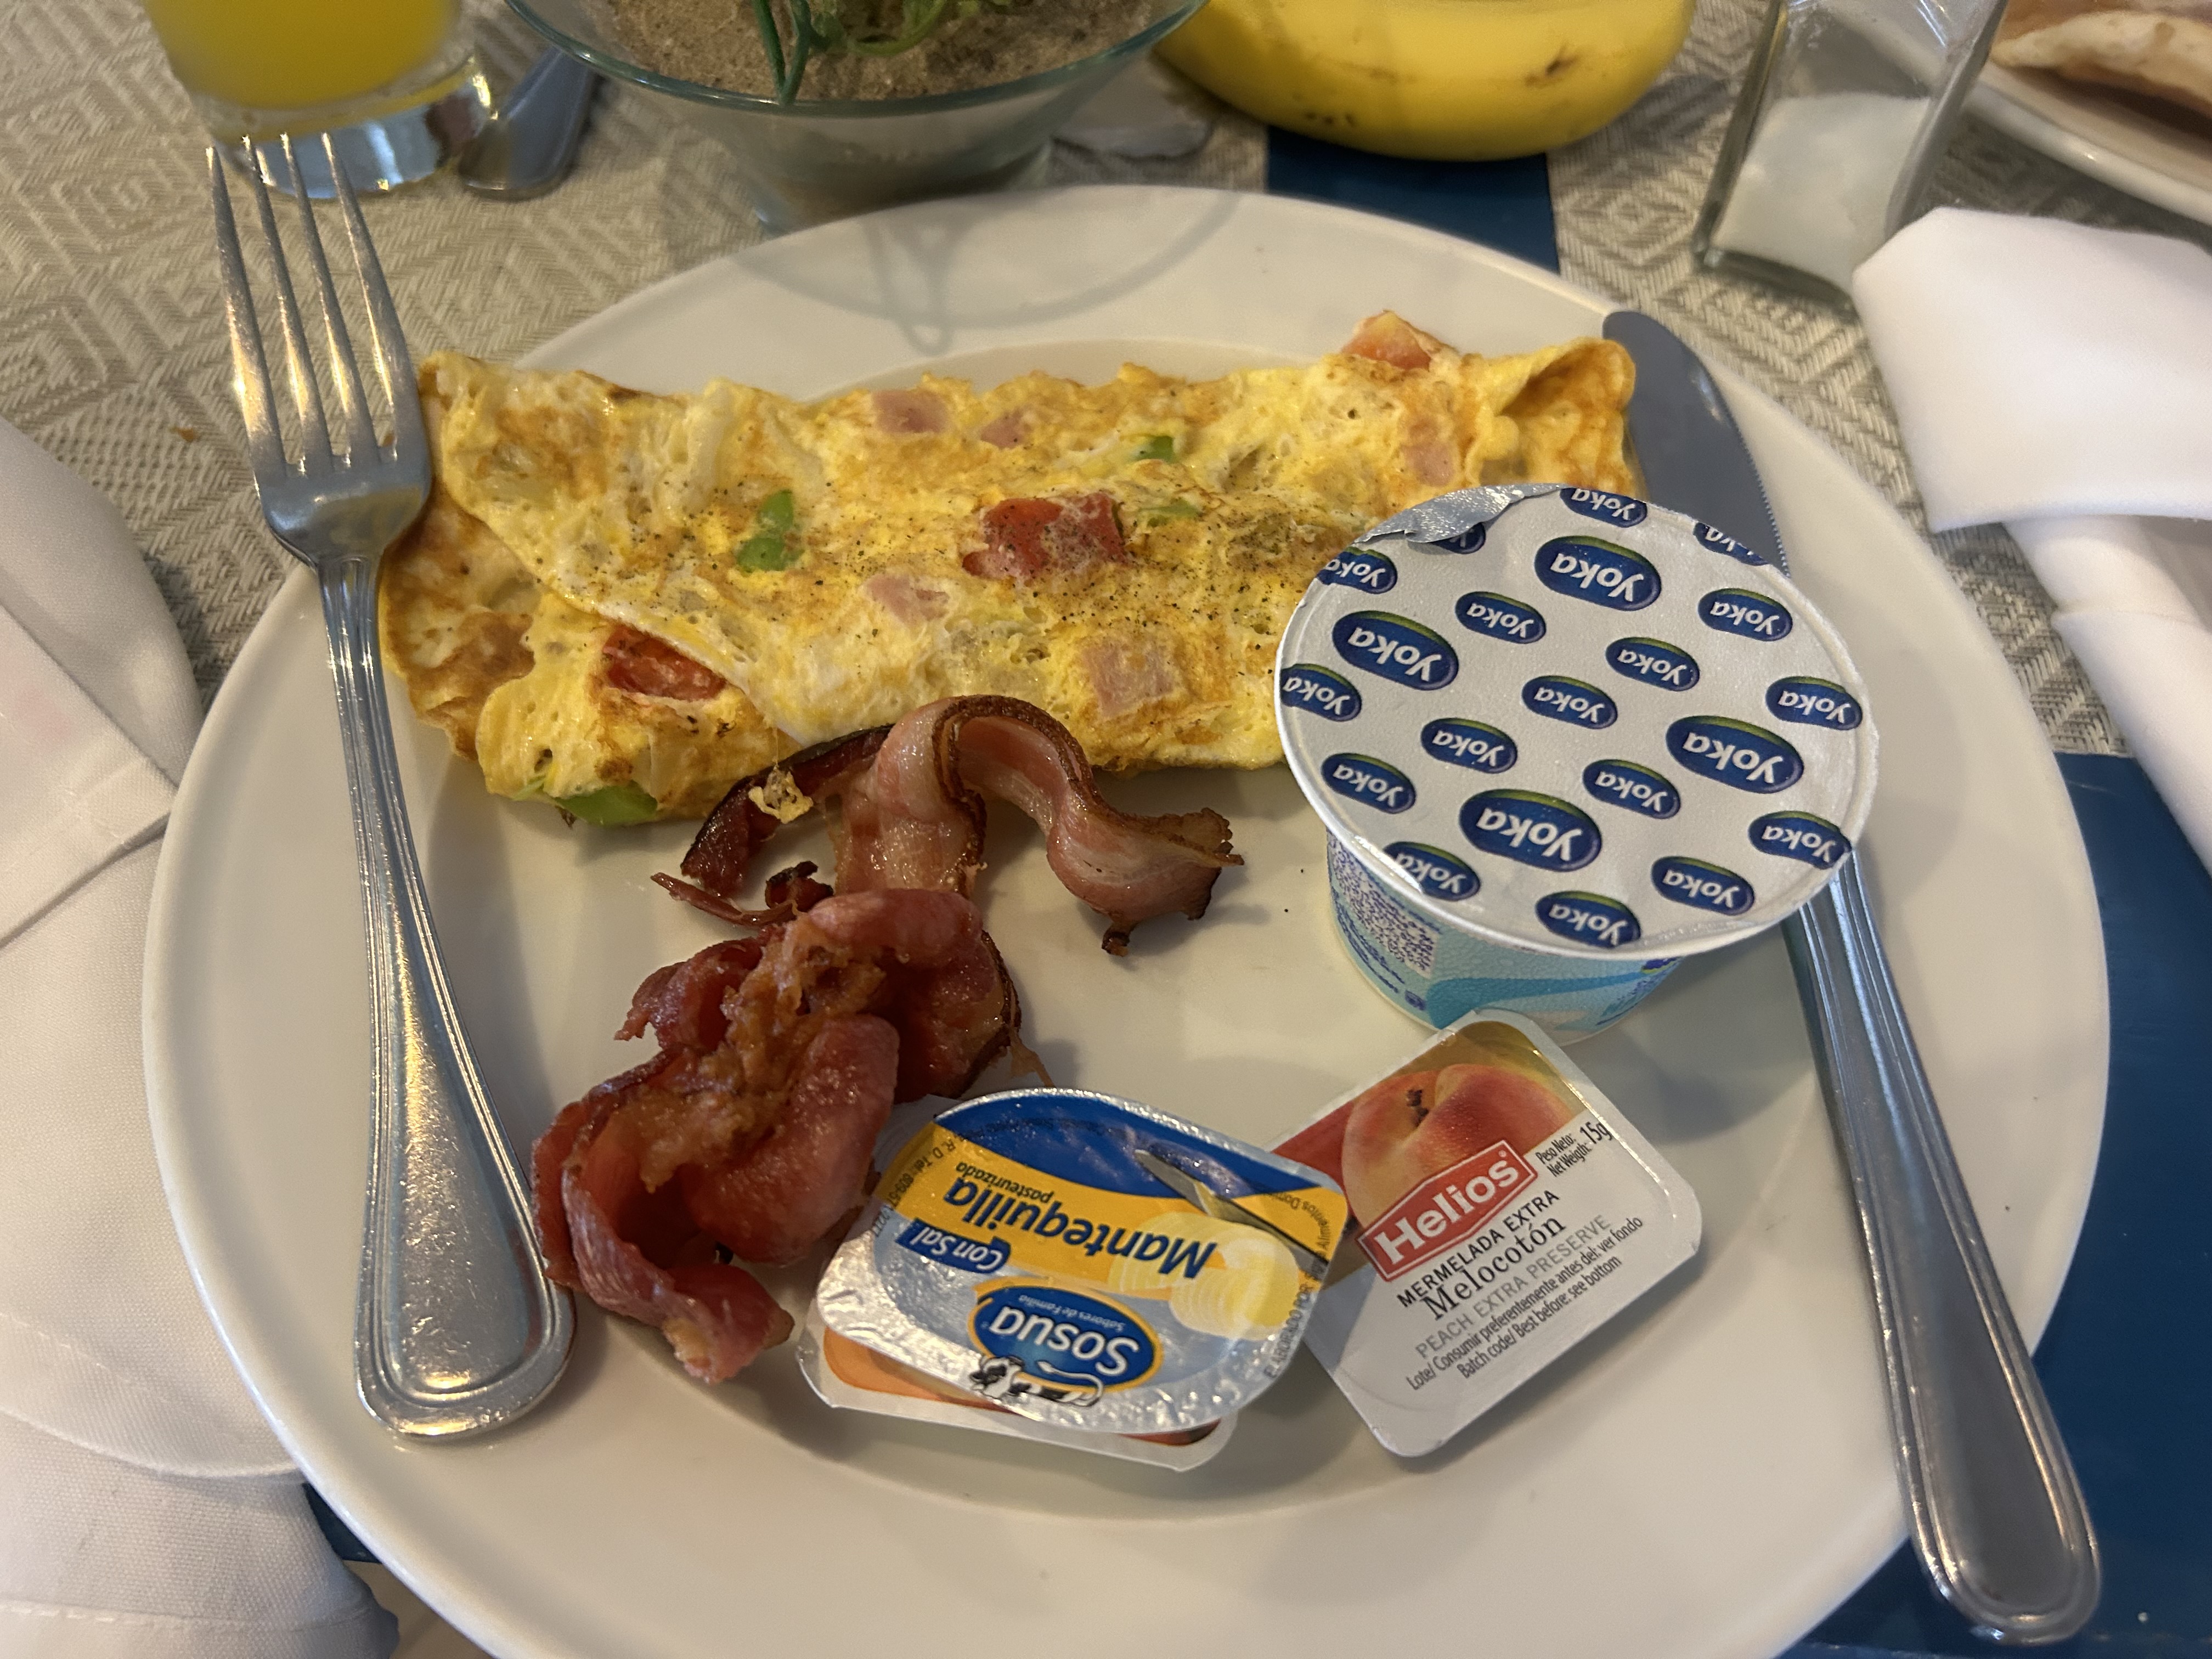 Dominican omelette with bacon